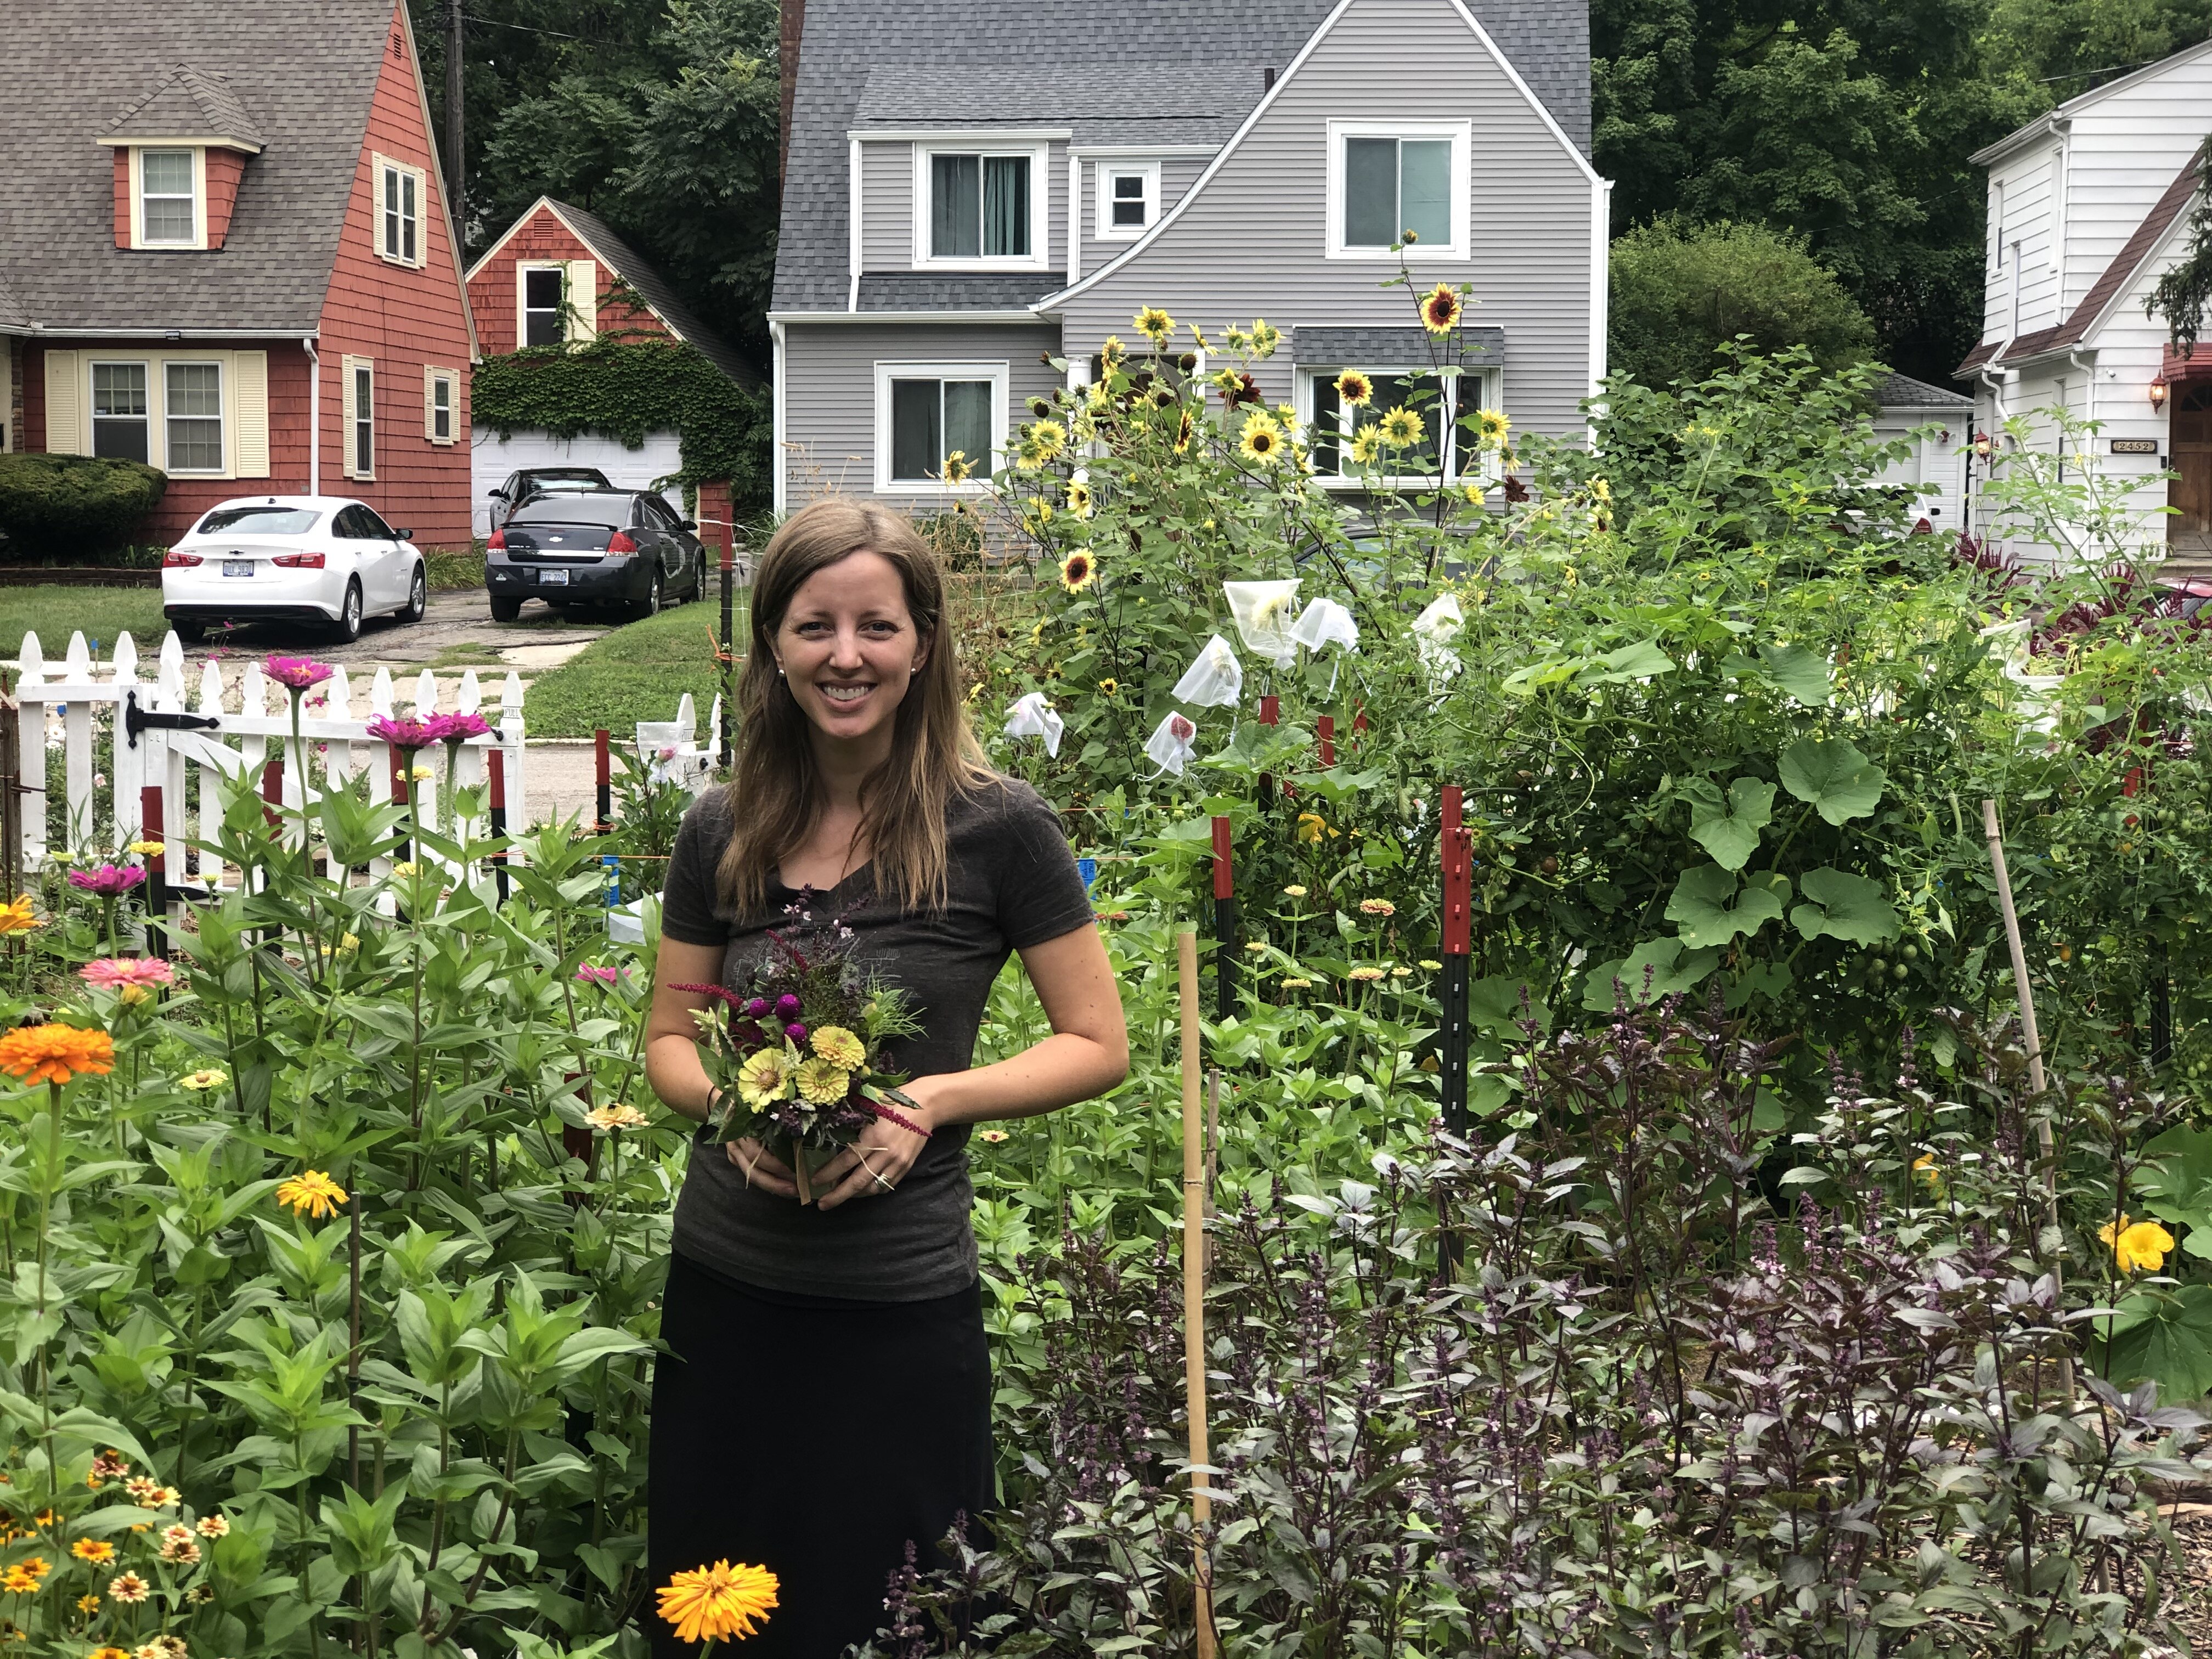 Janie Beuthin and her husband Ryan turned a vacant lot in Mott Park into a flower farm.